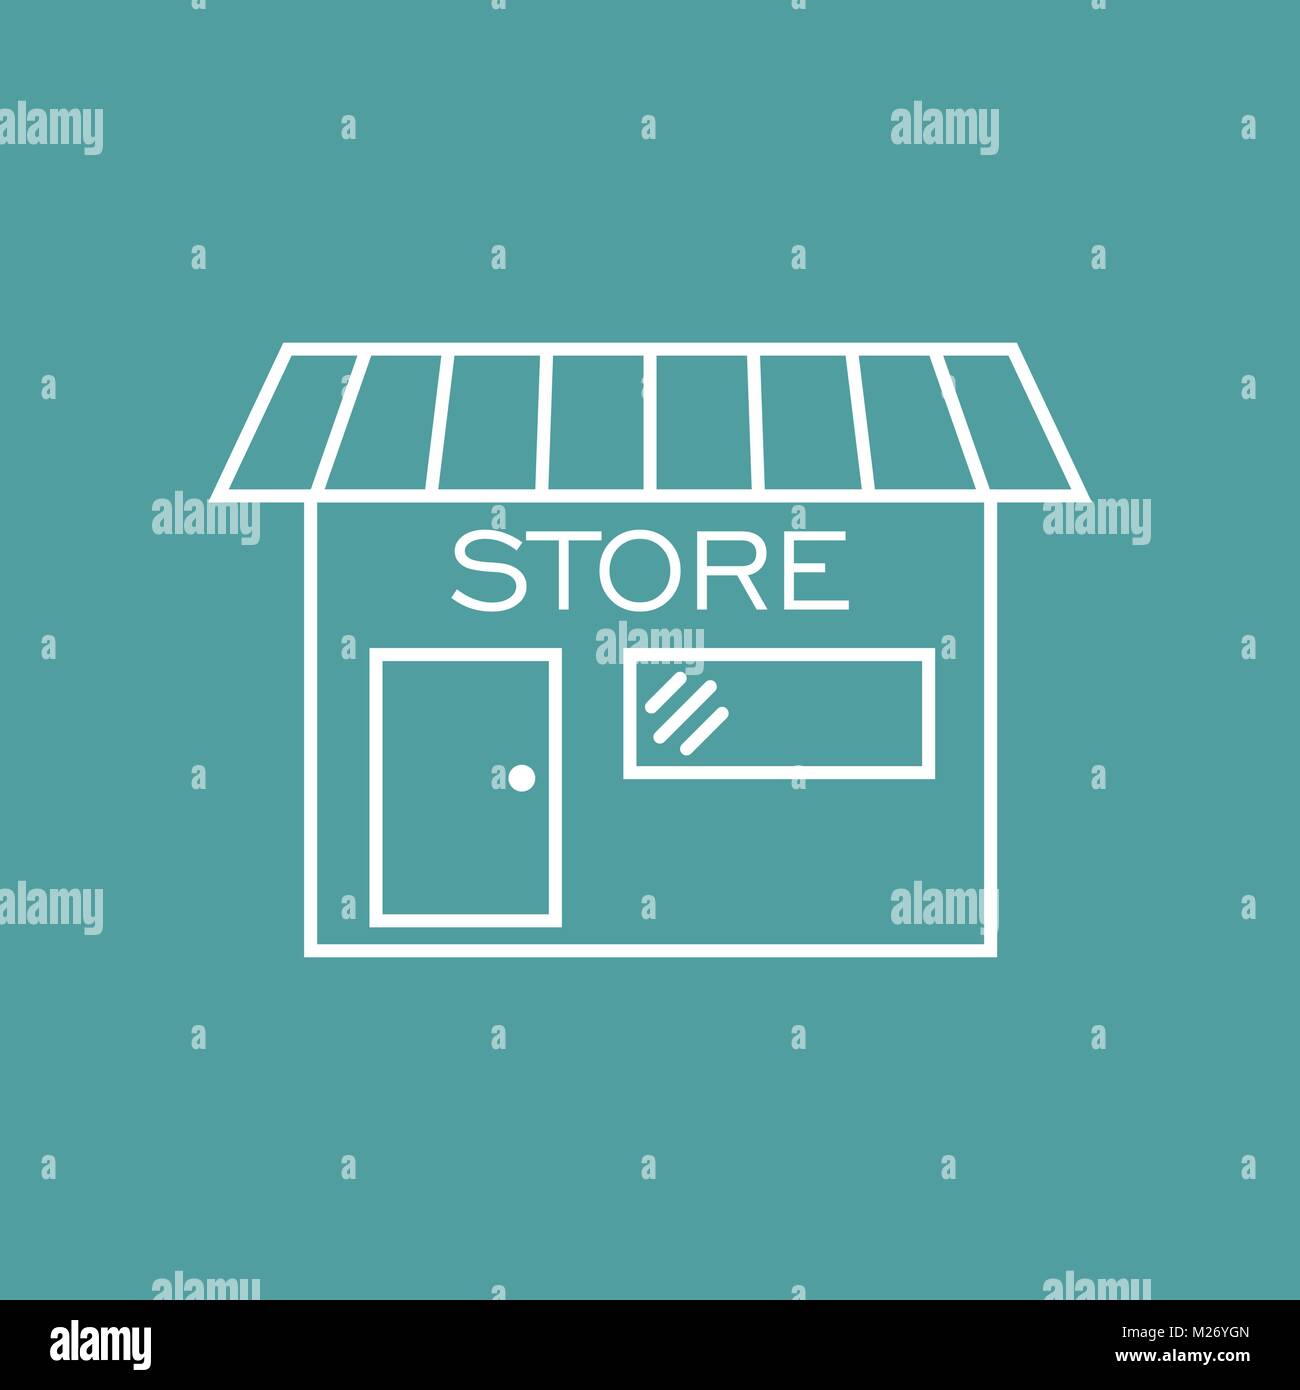 Store icon vector illustration in flat style. Shop symbol. Stock Vector